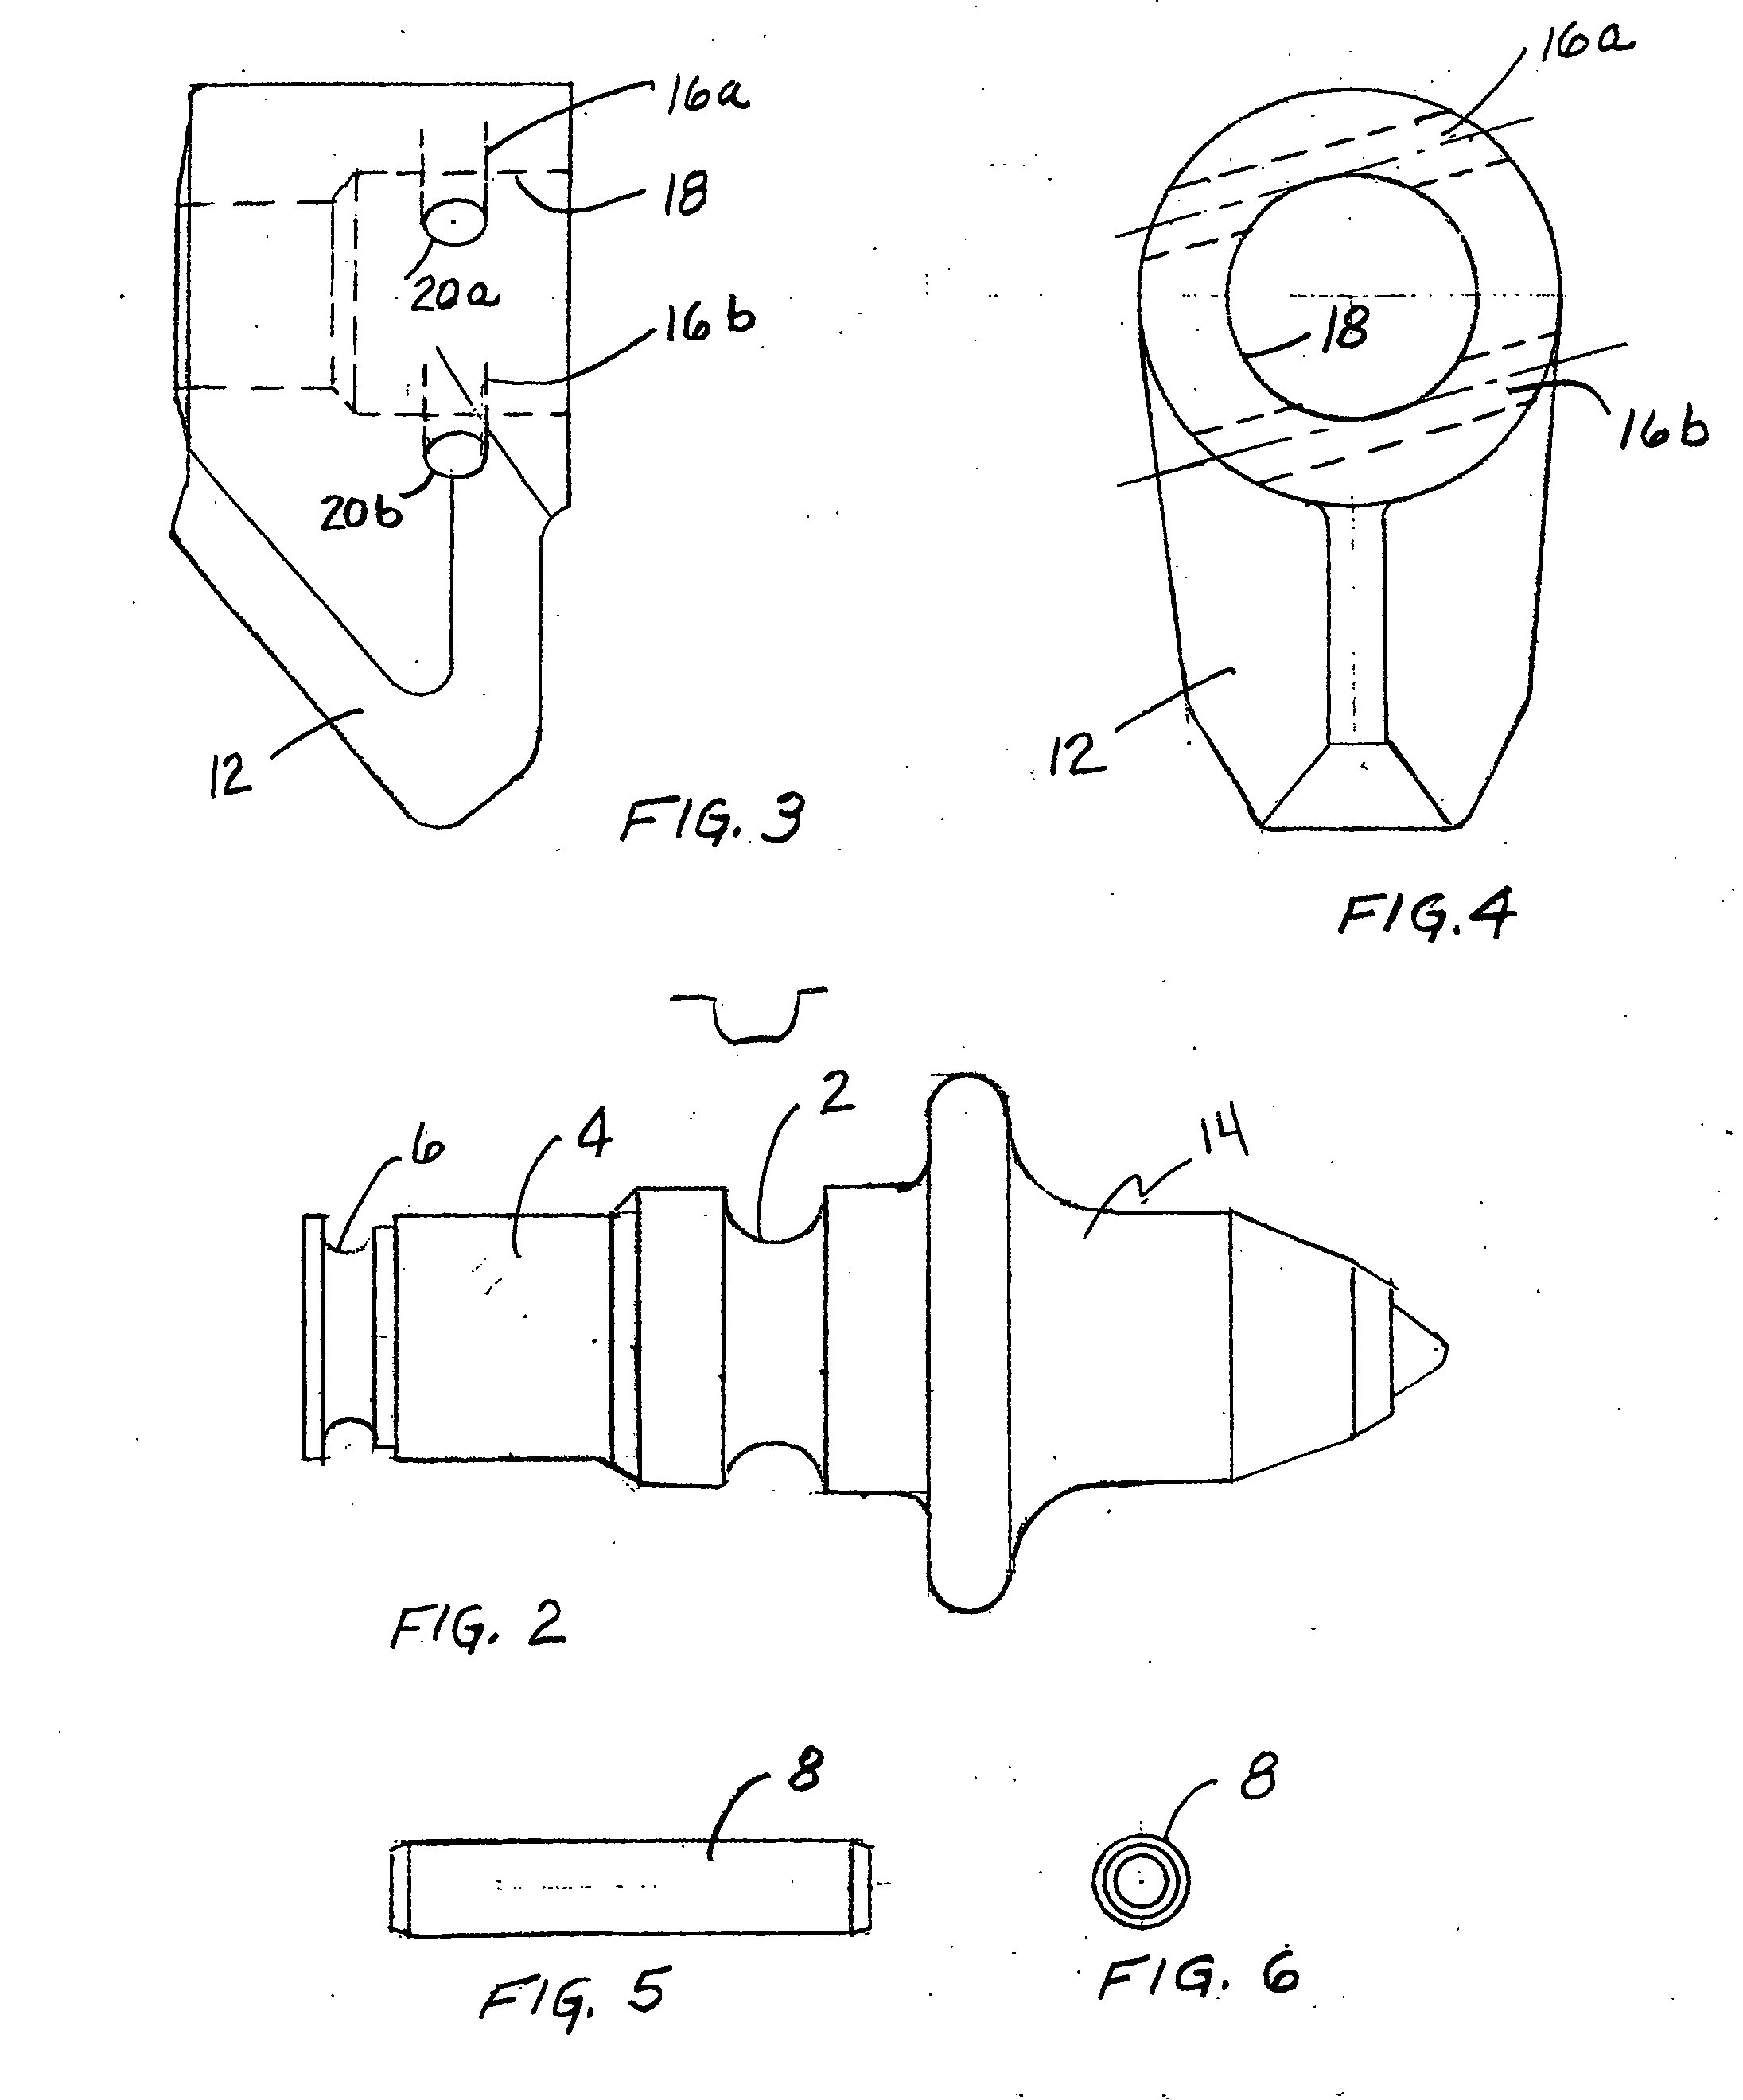 Retaining system for securing a cutting tool to a support block